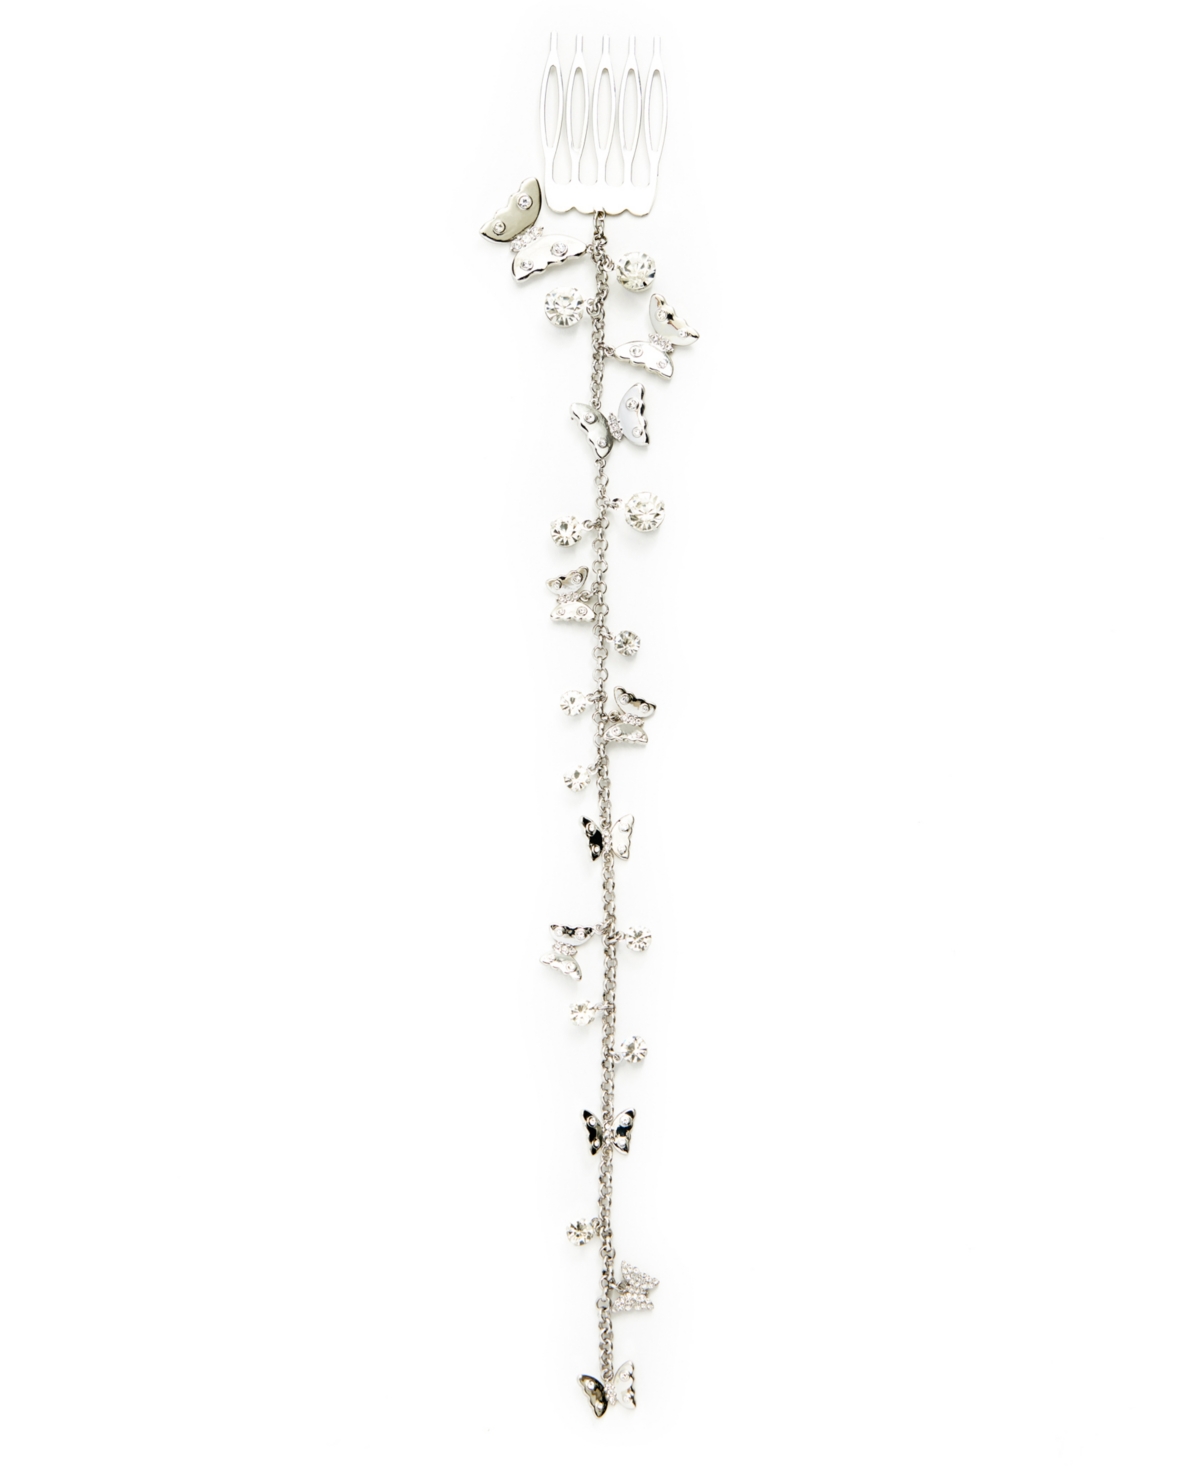 Kleinfeld Faux Stone Trailing Butterflies Hair Chain Comb In Crystal,rhodium